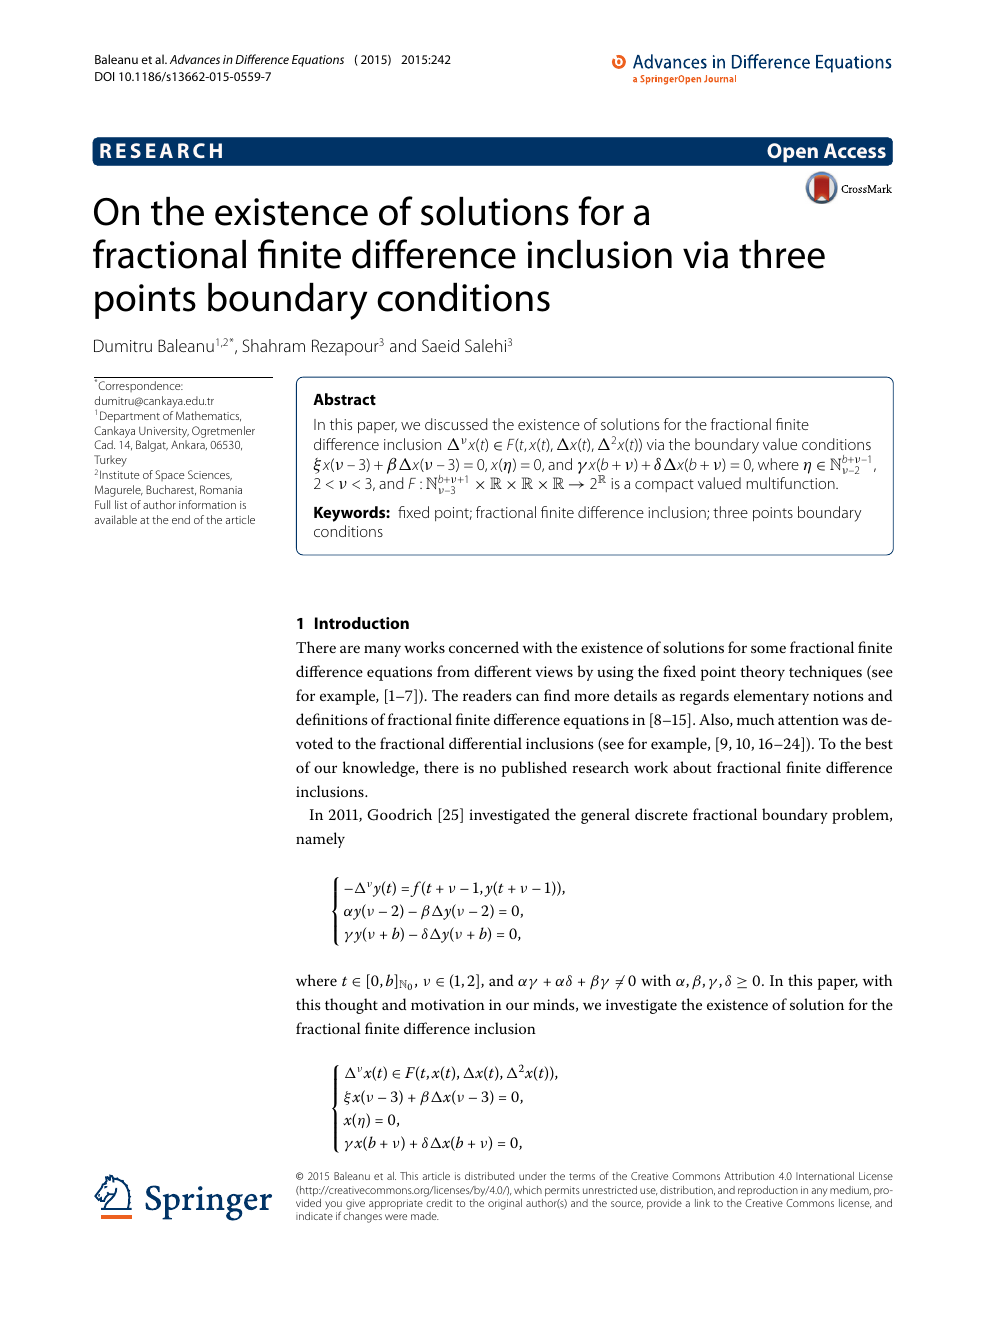 On The Existence Of Solutions For A Fractional Finite Difference Inclusion Via Three Points Boundary Conditions Topic Of Research Paper In Mathematics Download Scholarly Article Pdf And Read For Free On